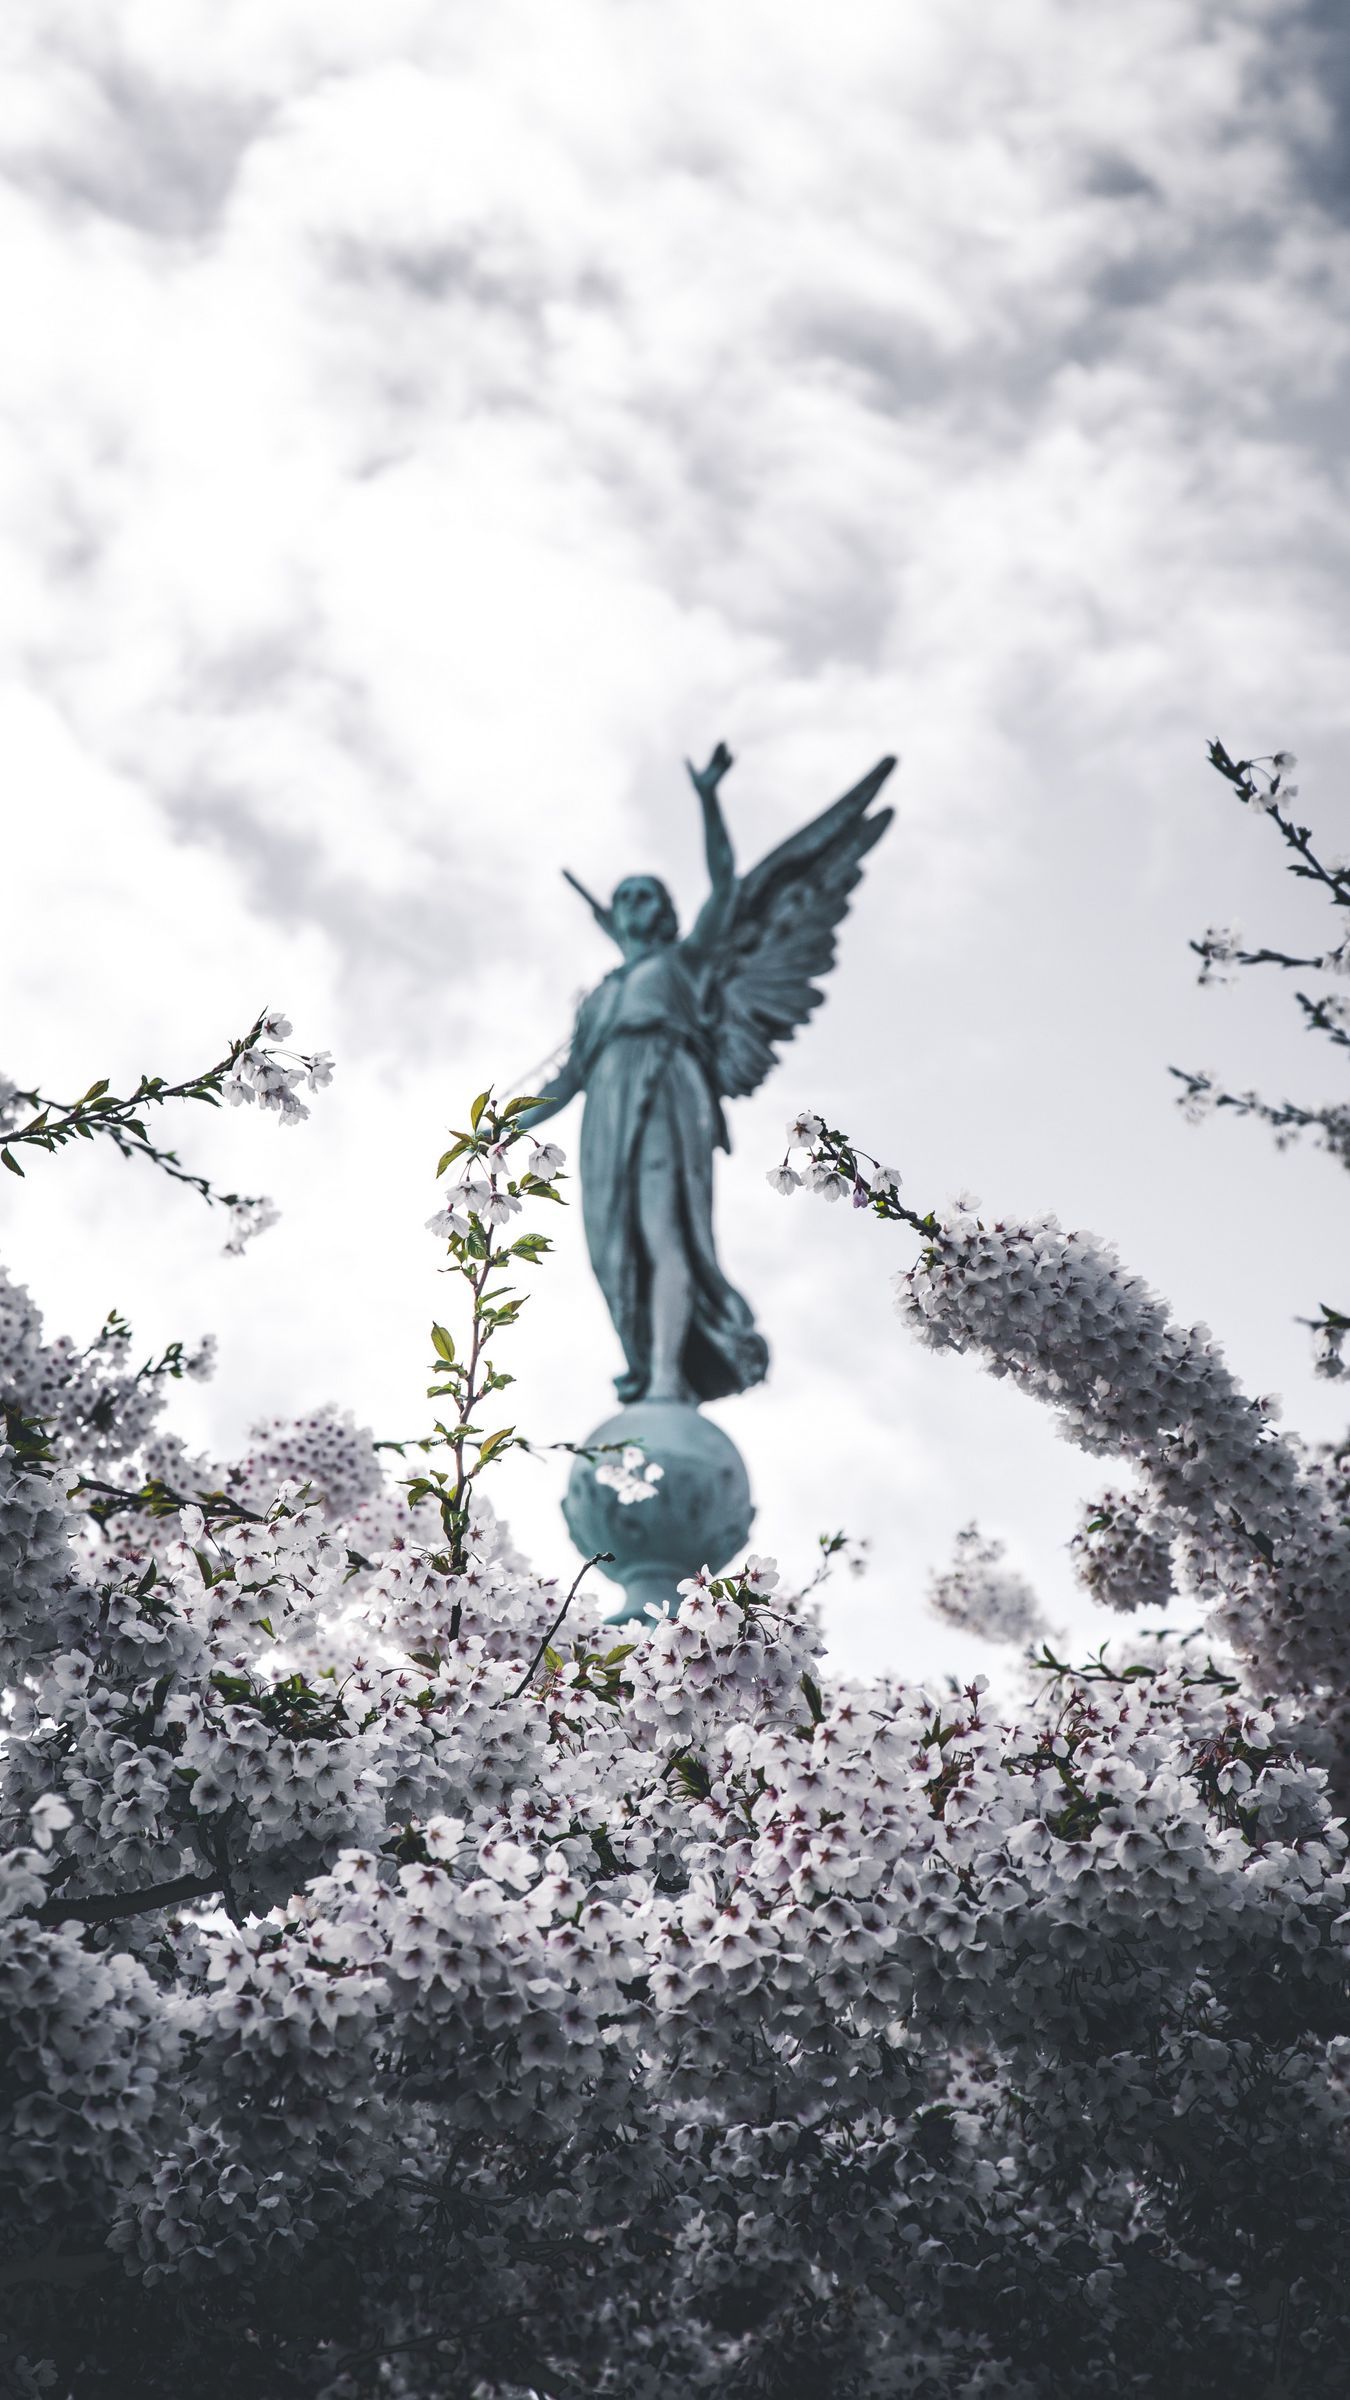 An angel statue surrounded by white flowers - Greek statue, statue